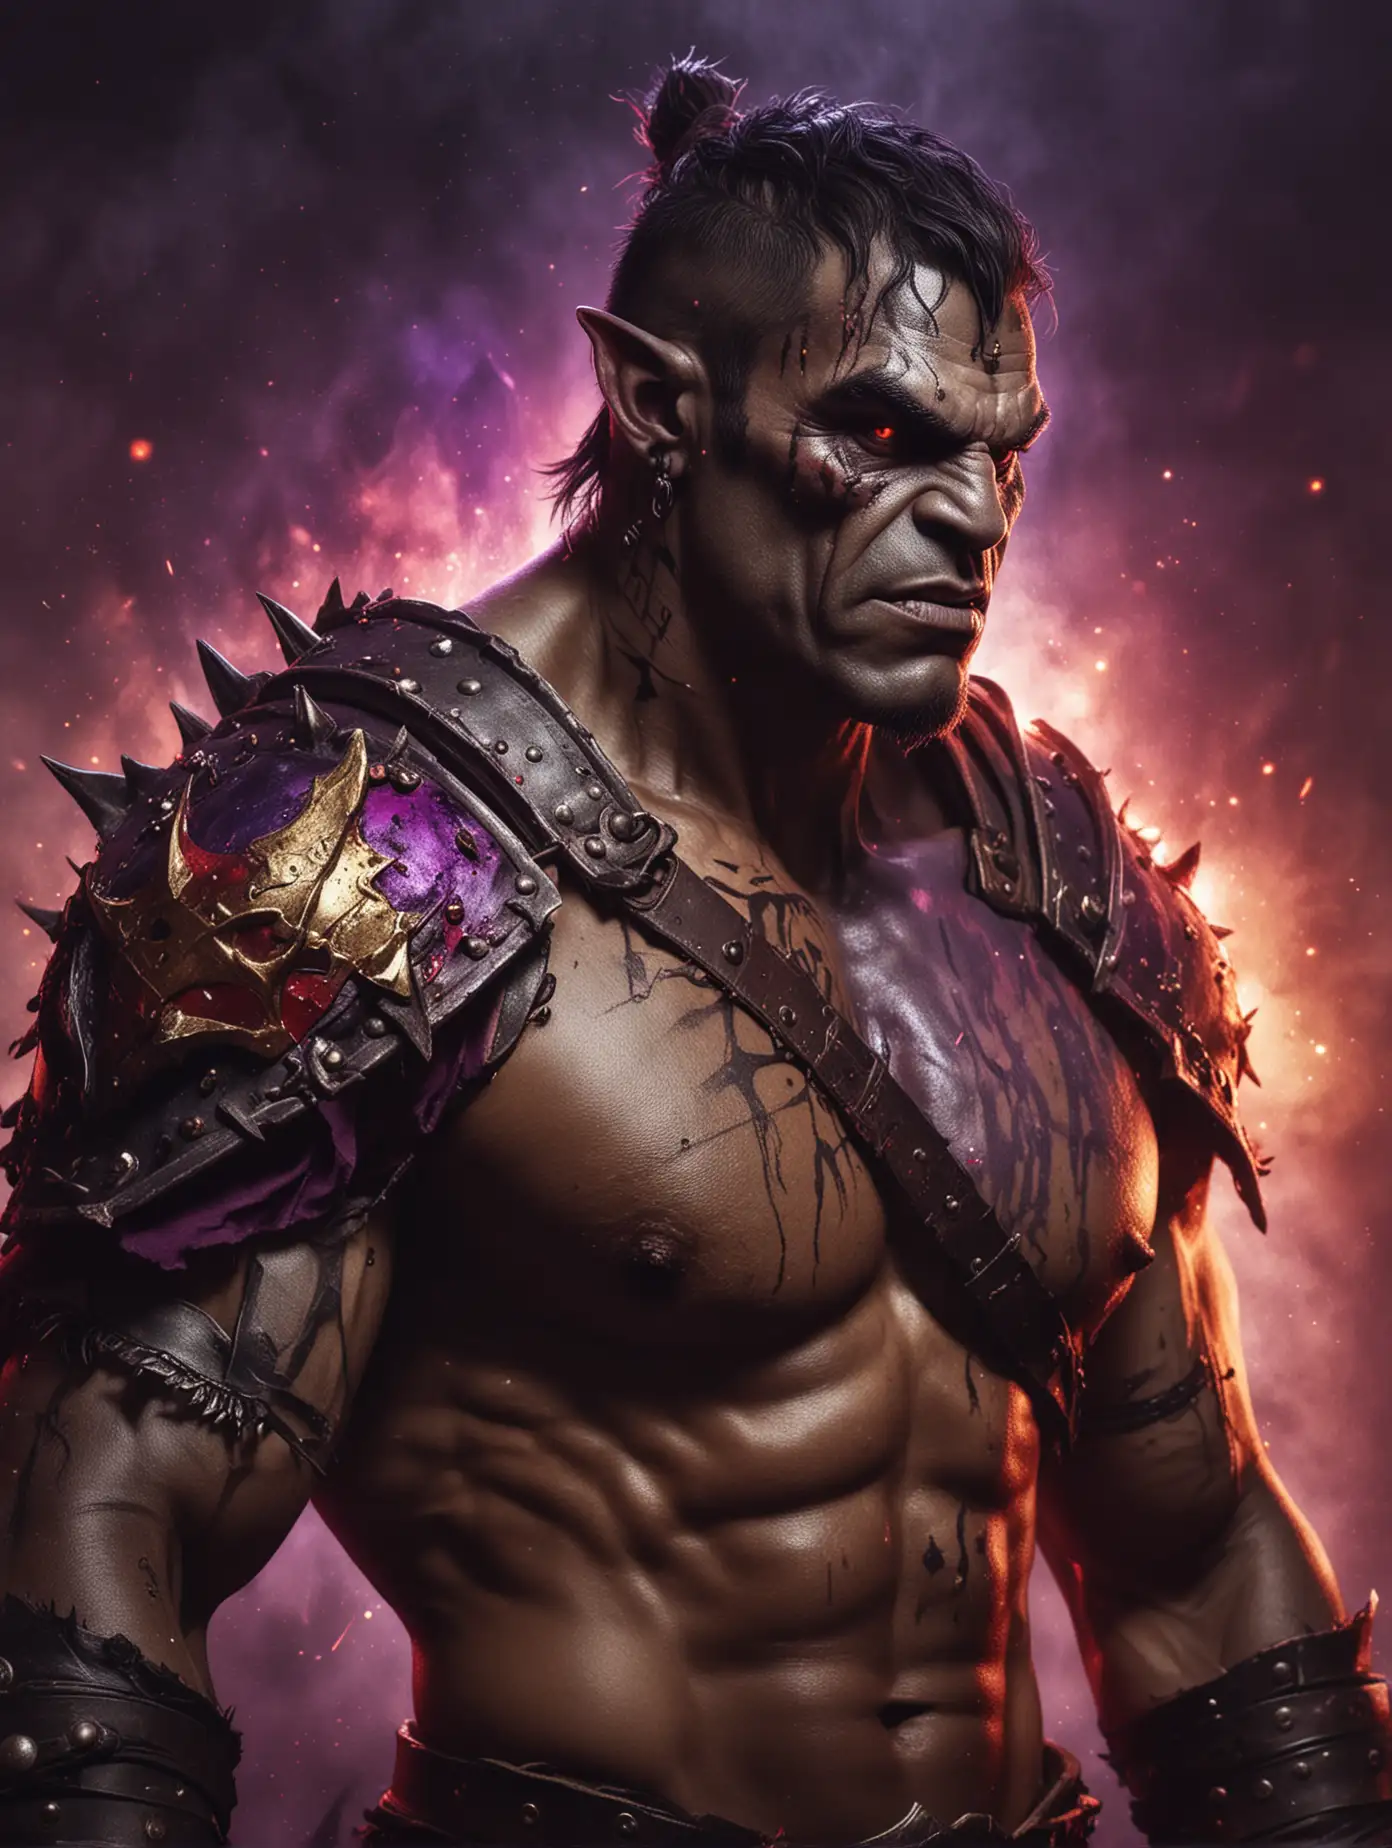 Illustration of a handsome man orc. He is shirtless, he is wearing a gladiator outfit. Black and red fog, purple flames, gold sparks, close up